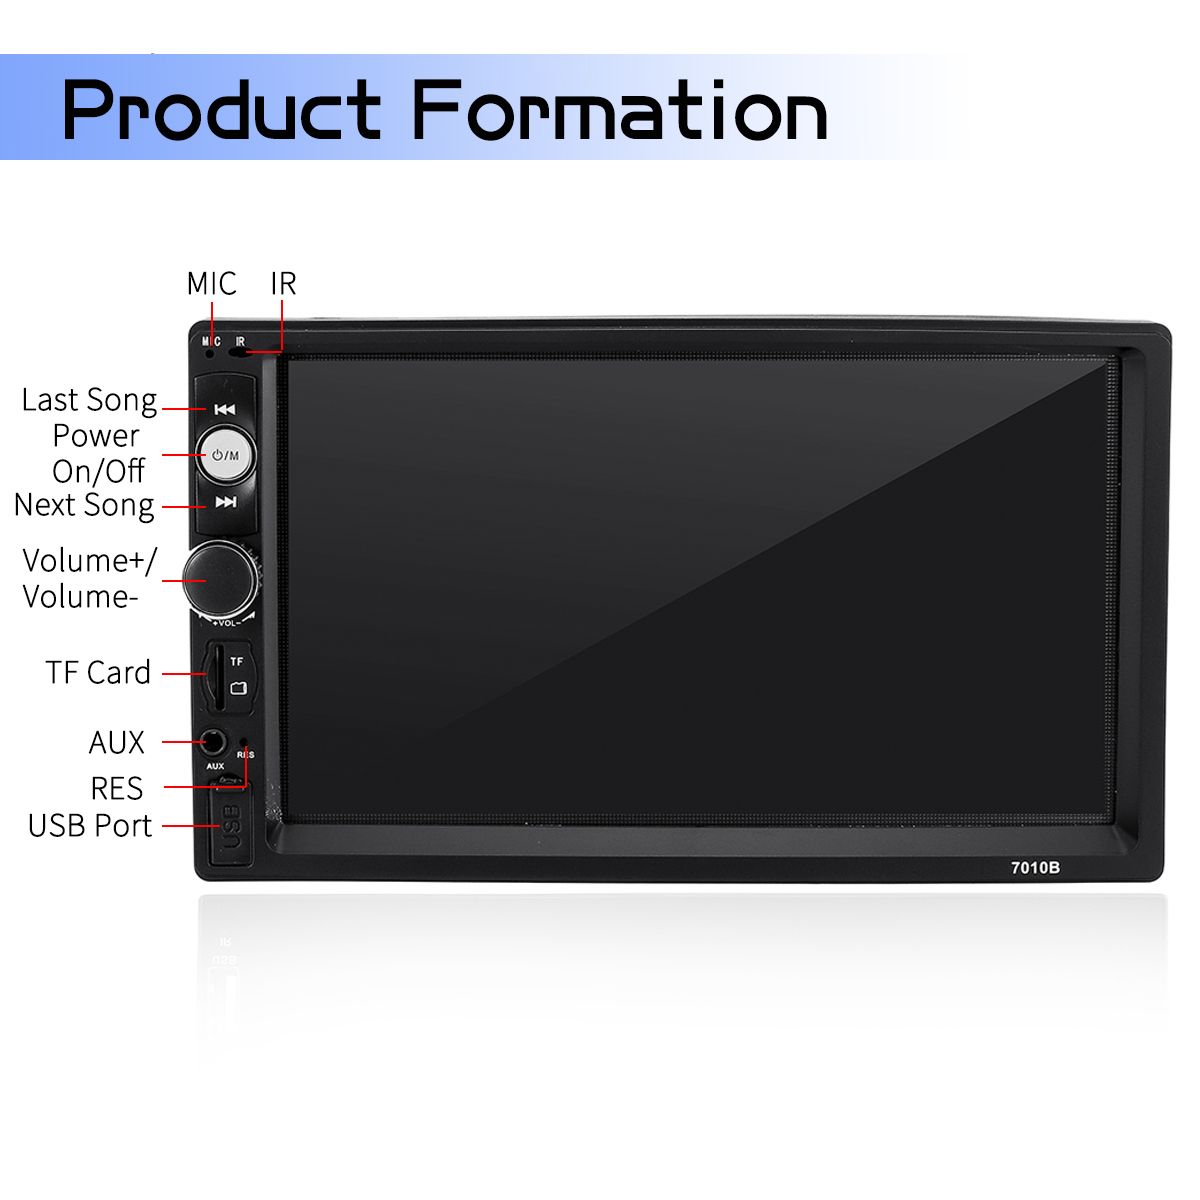 7010B-7-Inch-2Din-Car-MP5-Player-IPS-Touch-Screen-Stereo-FM-Radio-bluetooth-with-Rear-View-Camera-1491076